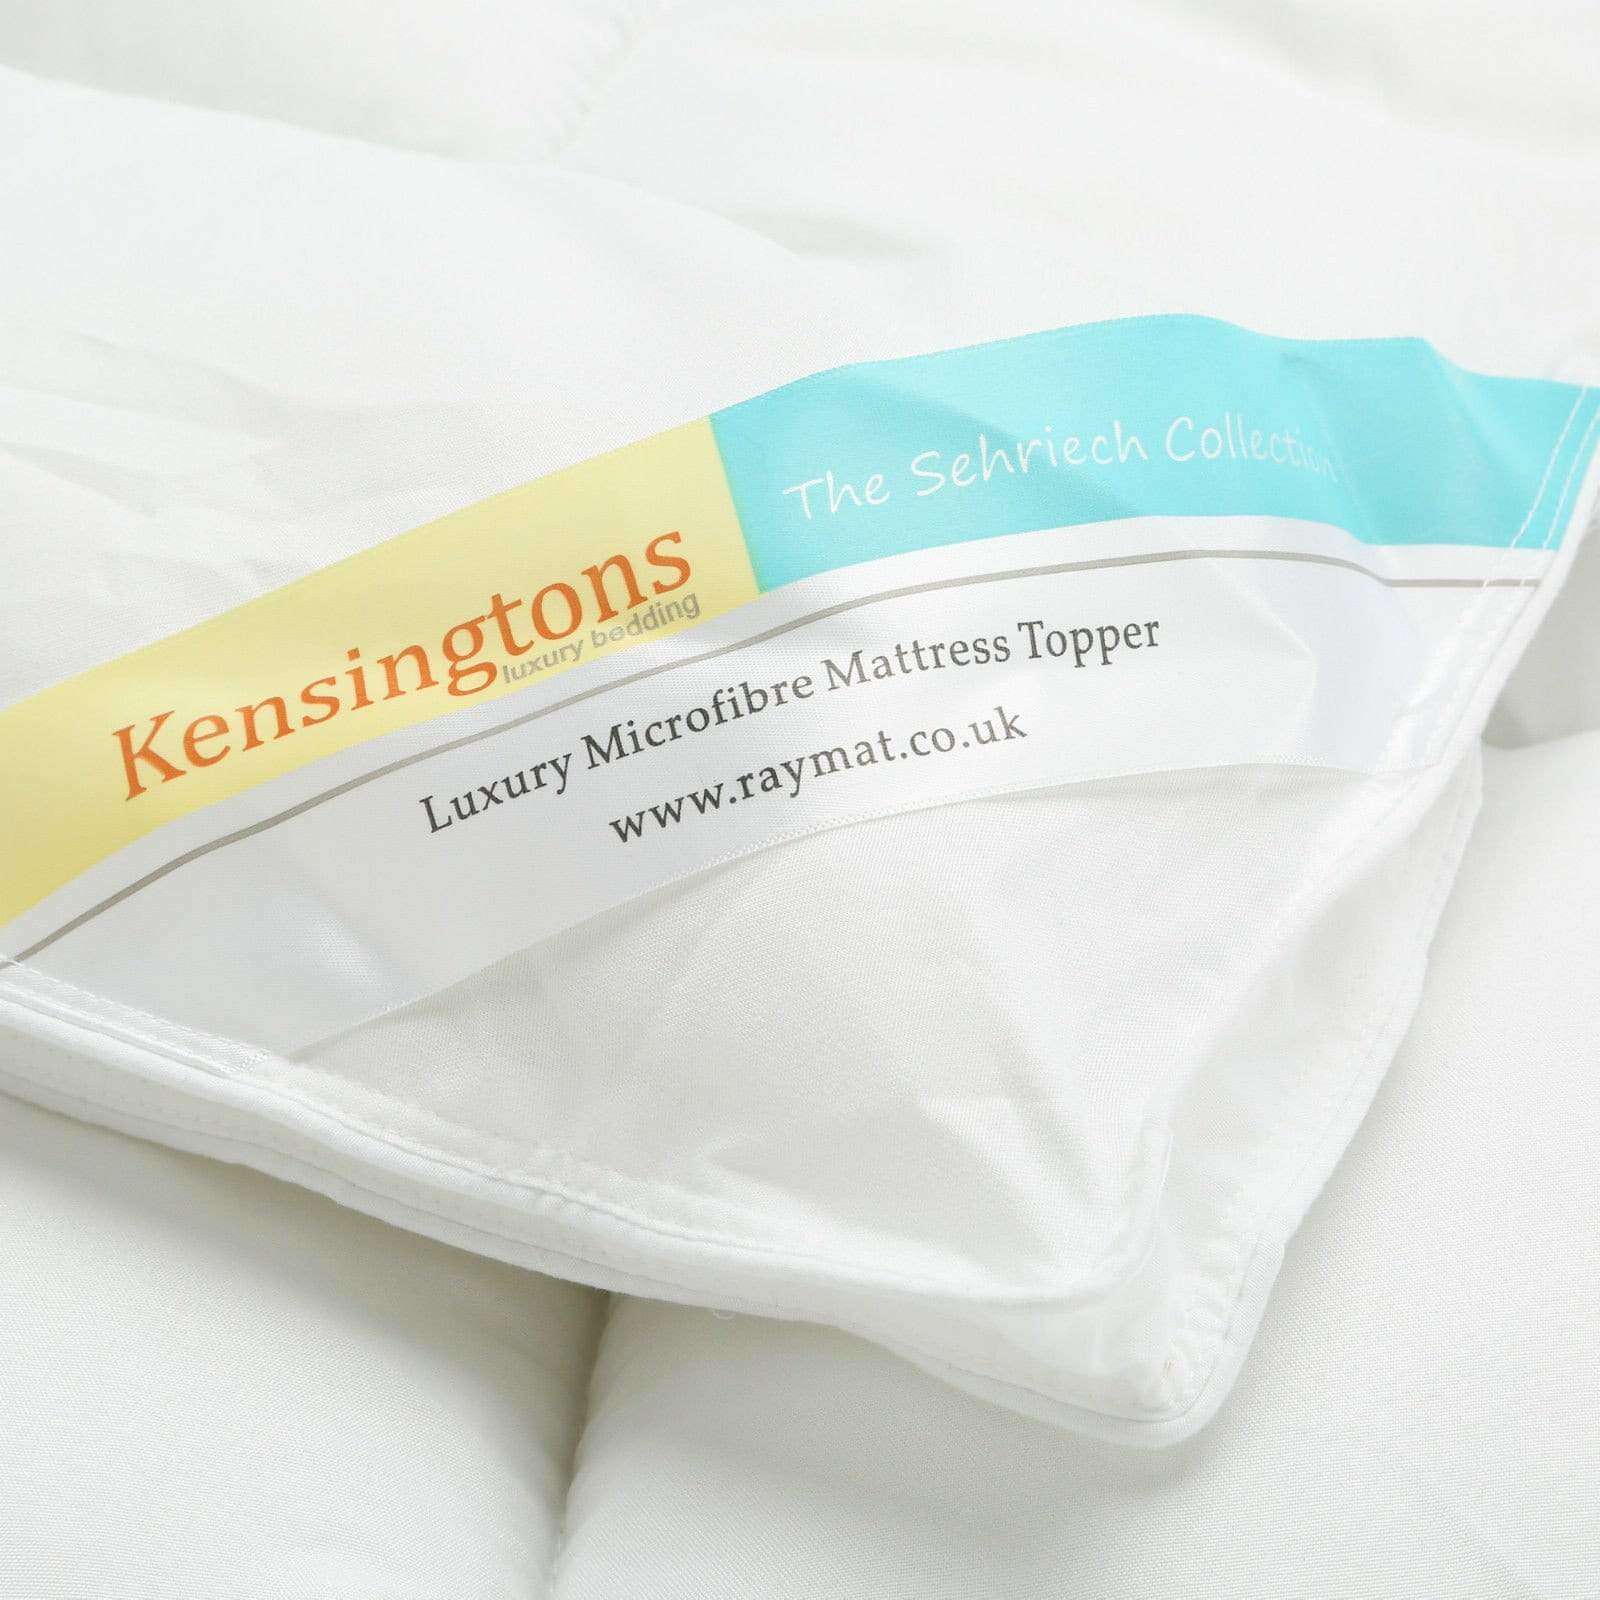 Kensingtons-Mattress-Toppers-luxury-700g-All-Sizes-Available